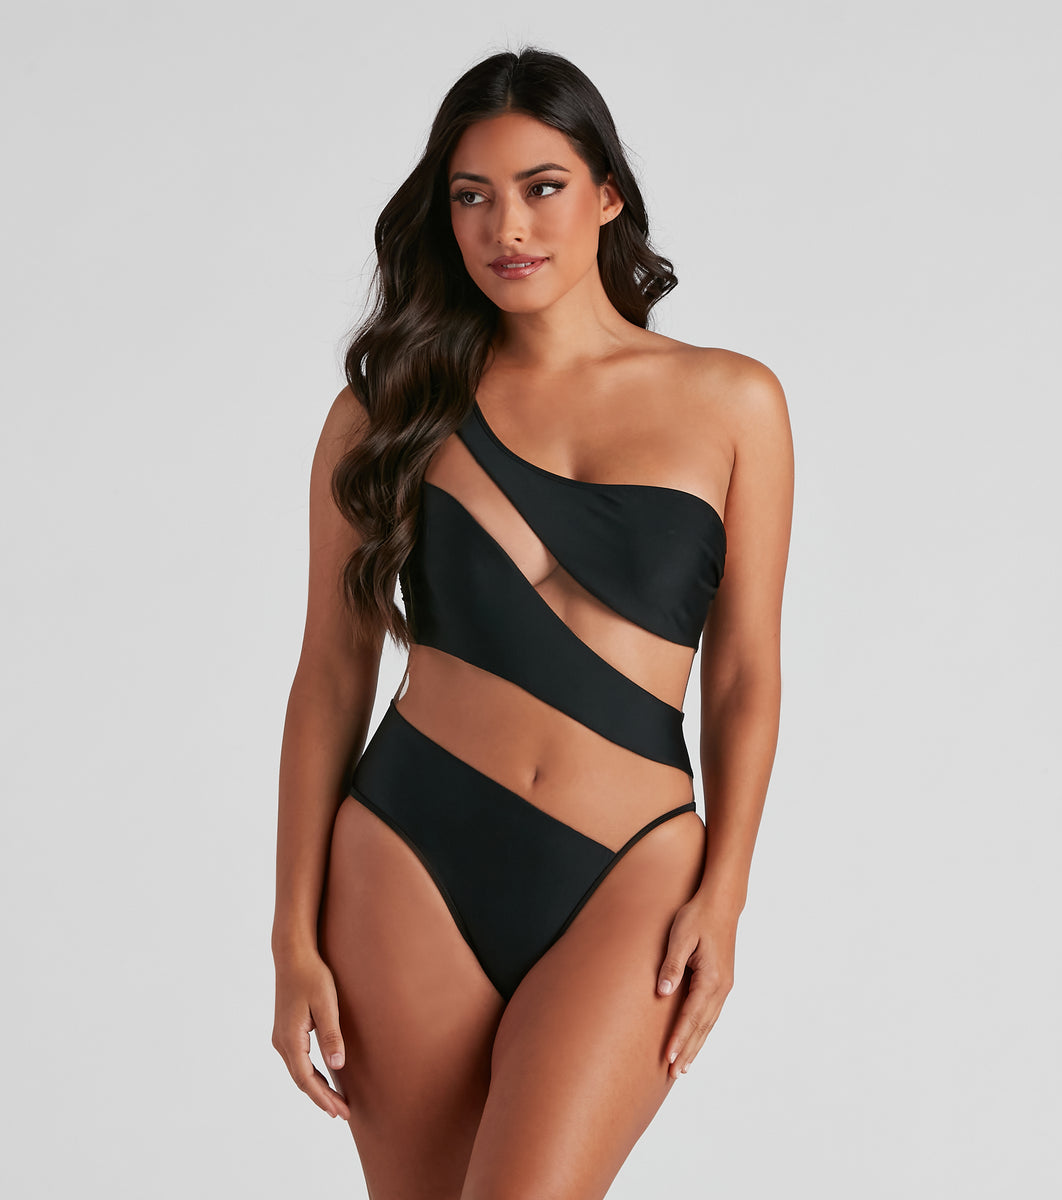 Pink The Wave Monowire One-Piece Swimsuit